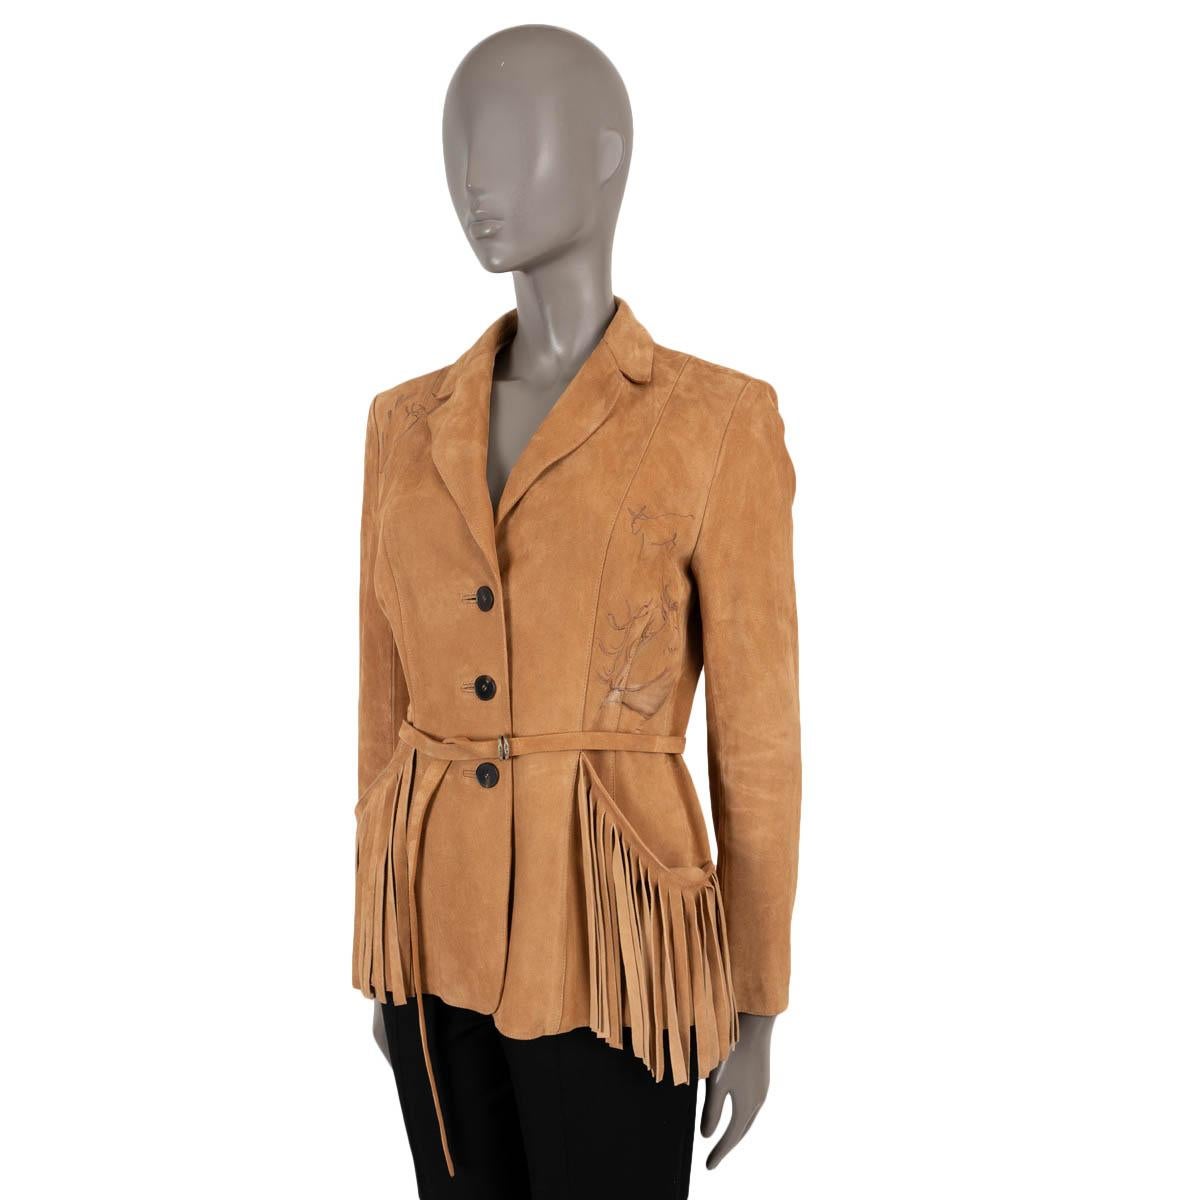 100% authentic Christian Dior Bar jacket in beige suede (100%). Features native American hand painted art, fringe trims and matching belt. Closes with buttons on the front and is partially lined in cotton (100%). Has been worn and is in excellent